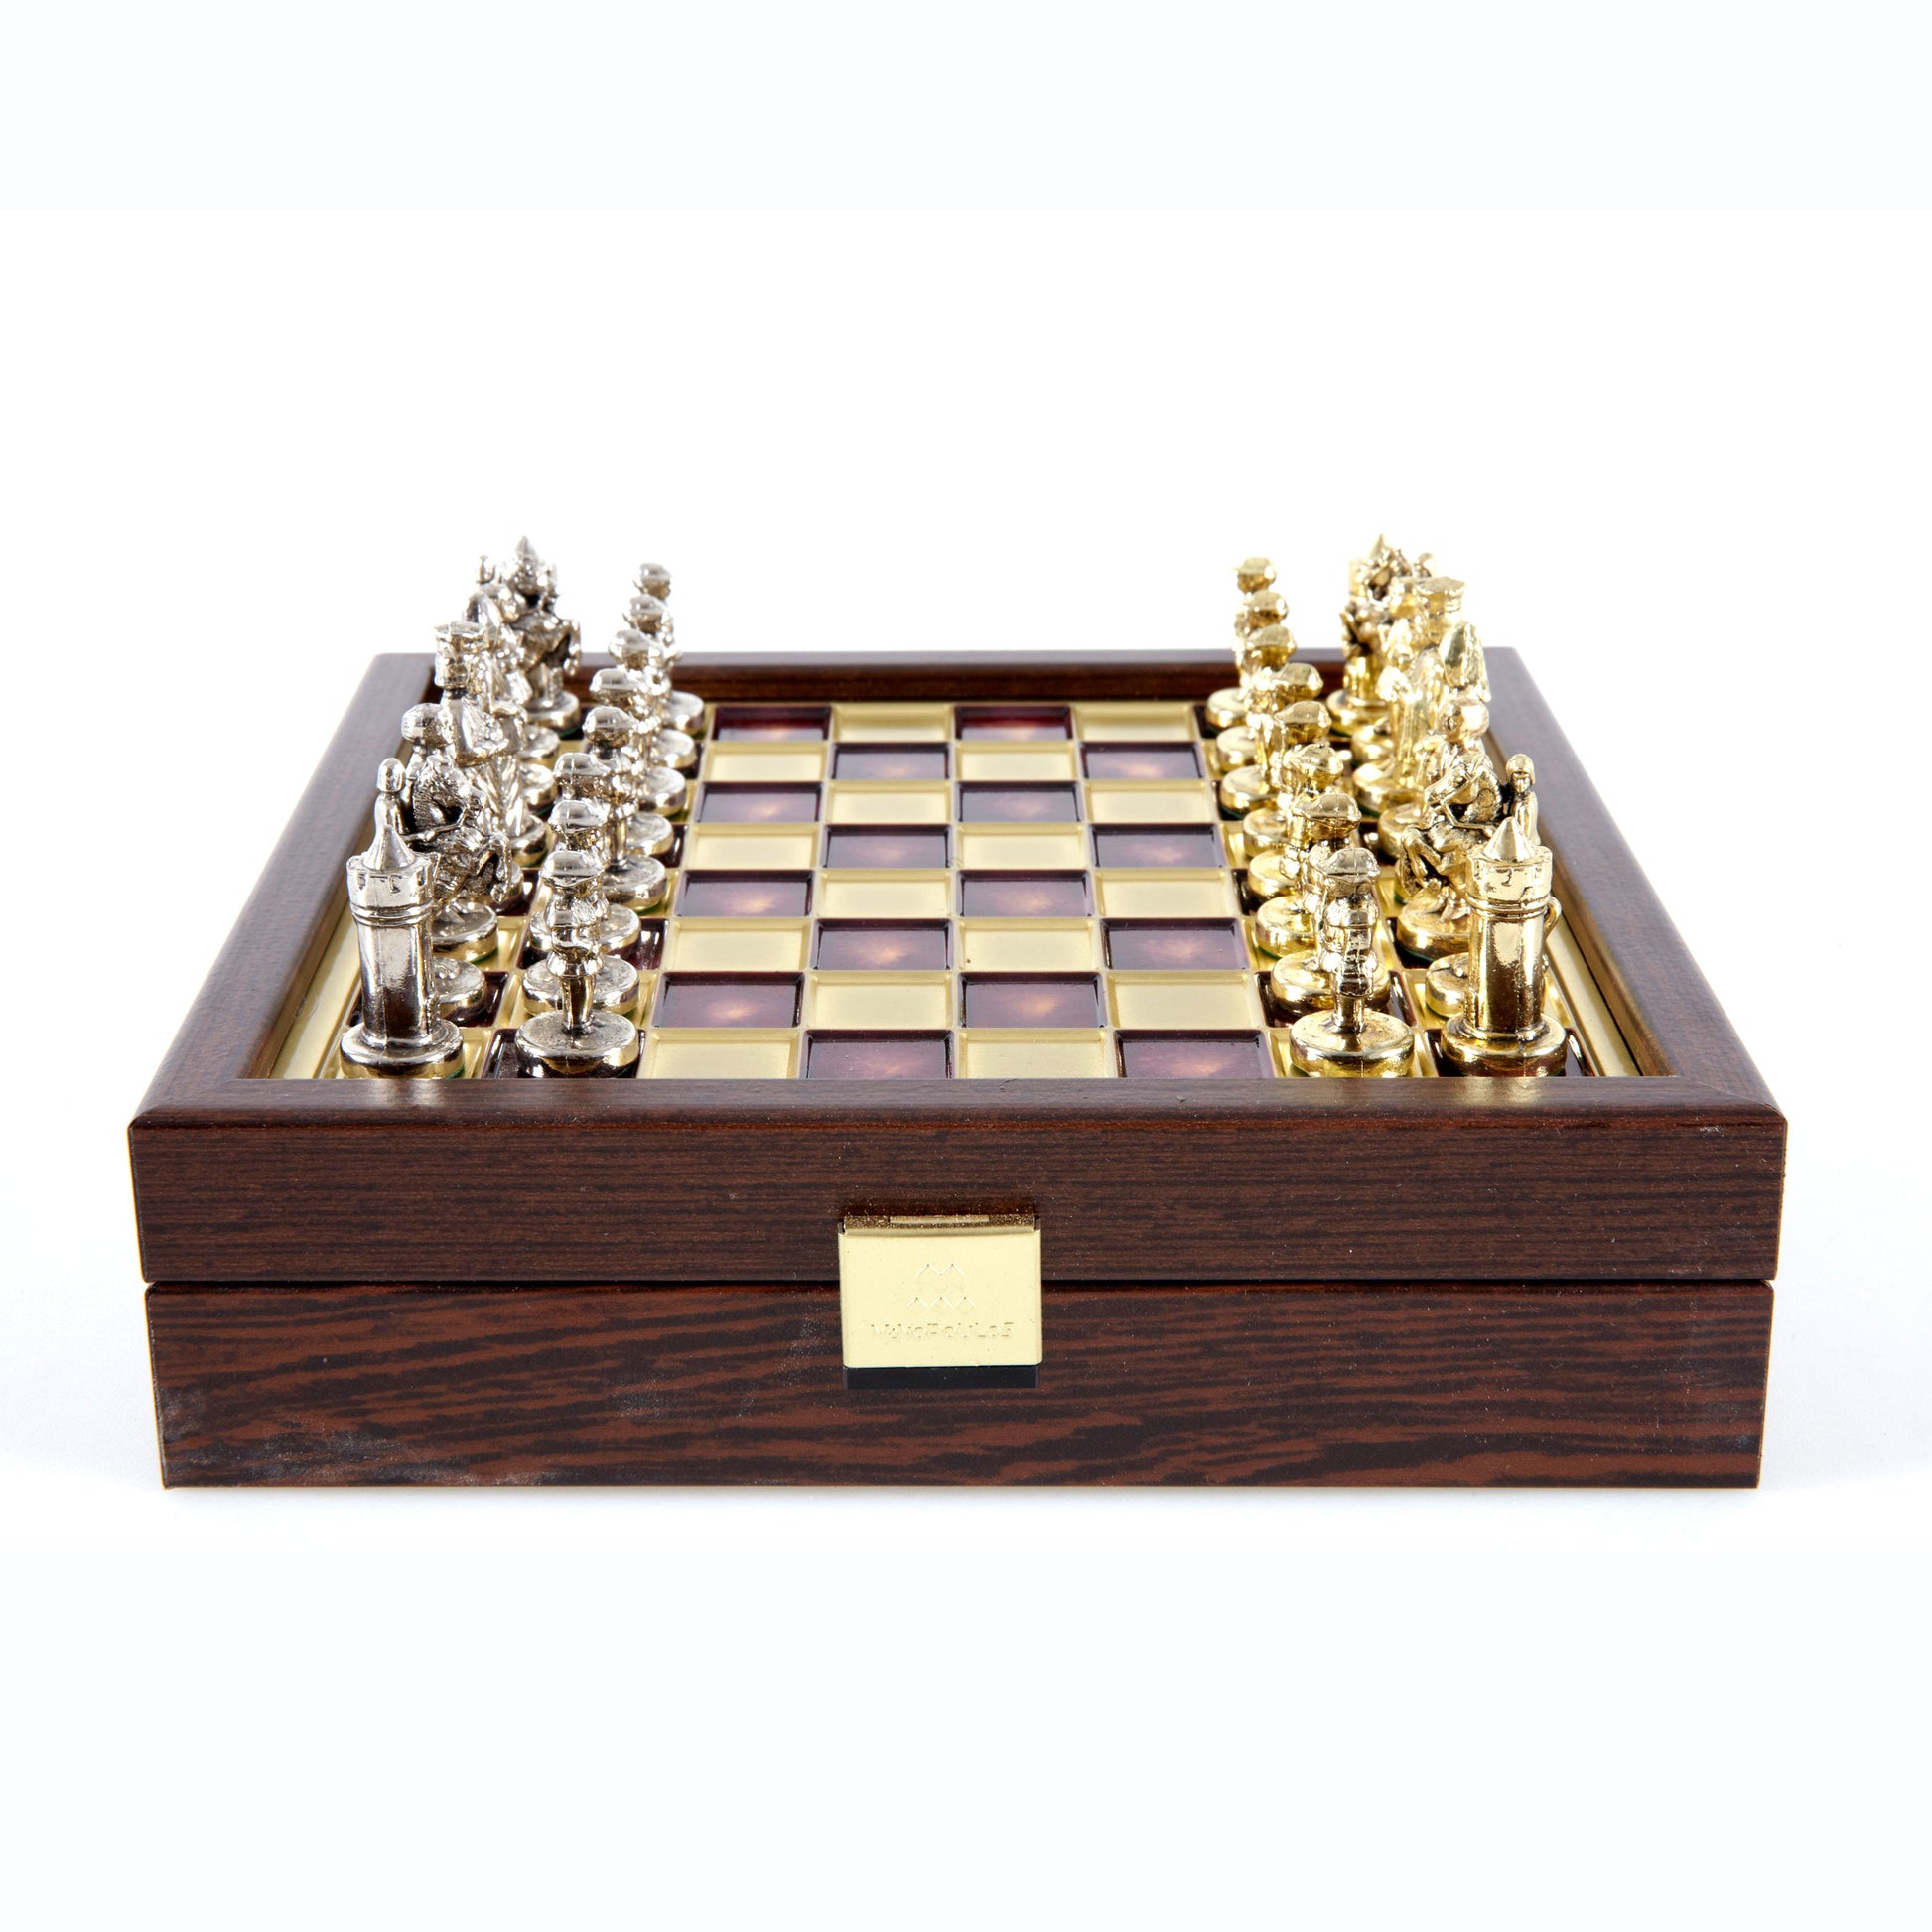 BYZANTINE EMPIRE CHESS SET In Wooden Box With Storage with gold/silver chessmen and bronze chessboard 20 x 20cm (Extra Small) - Premium Chess from MANOPOULOS Chess & Backgammon - Just €79! Shop now at MANOPOULOS Chess & Backgammon